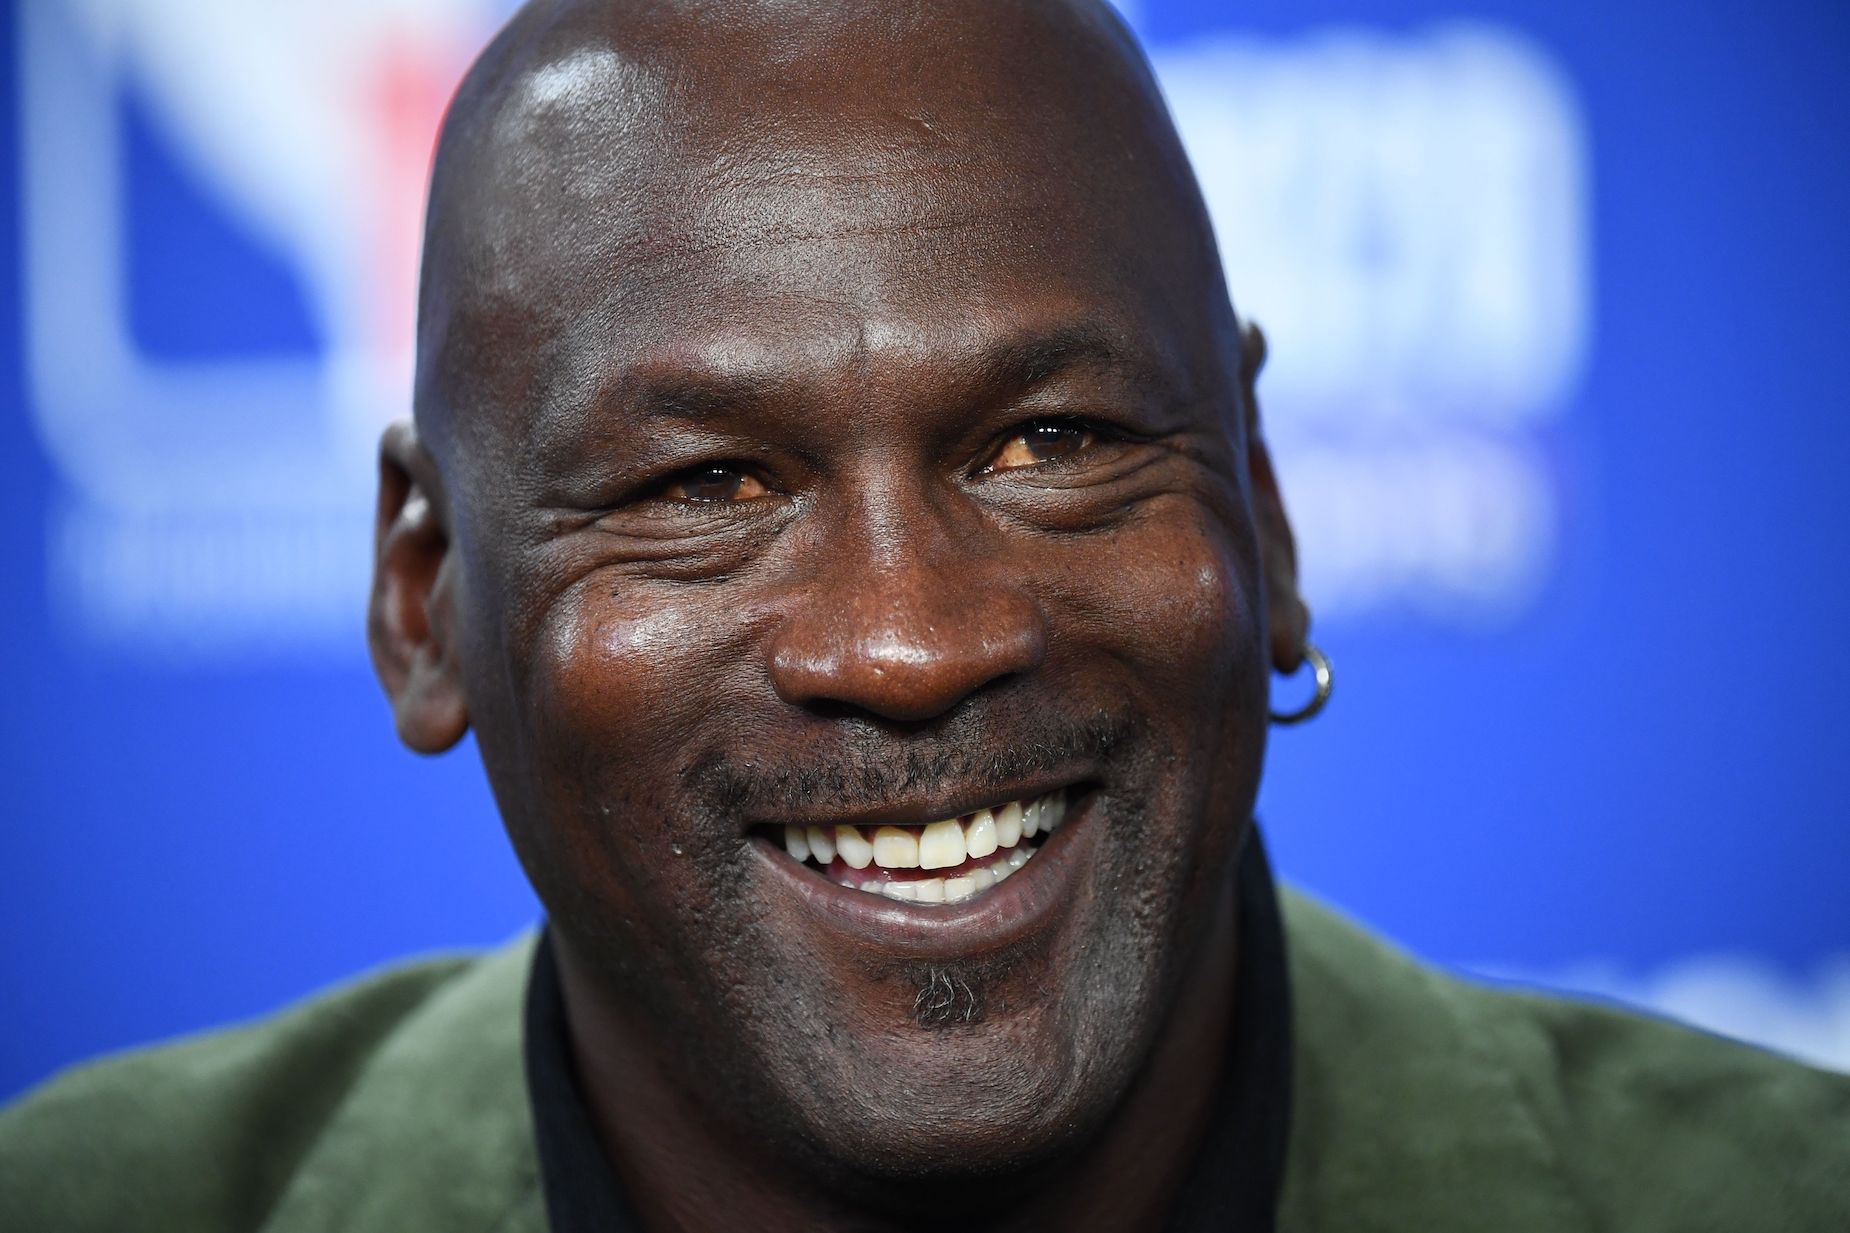 Michael Jordan apparently took a friendly game of dominoes with Anthony Anderson pretty seriously.